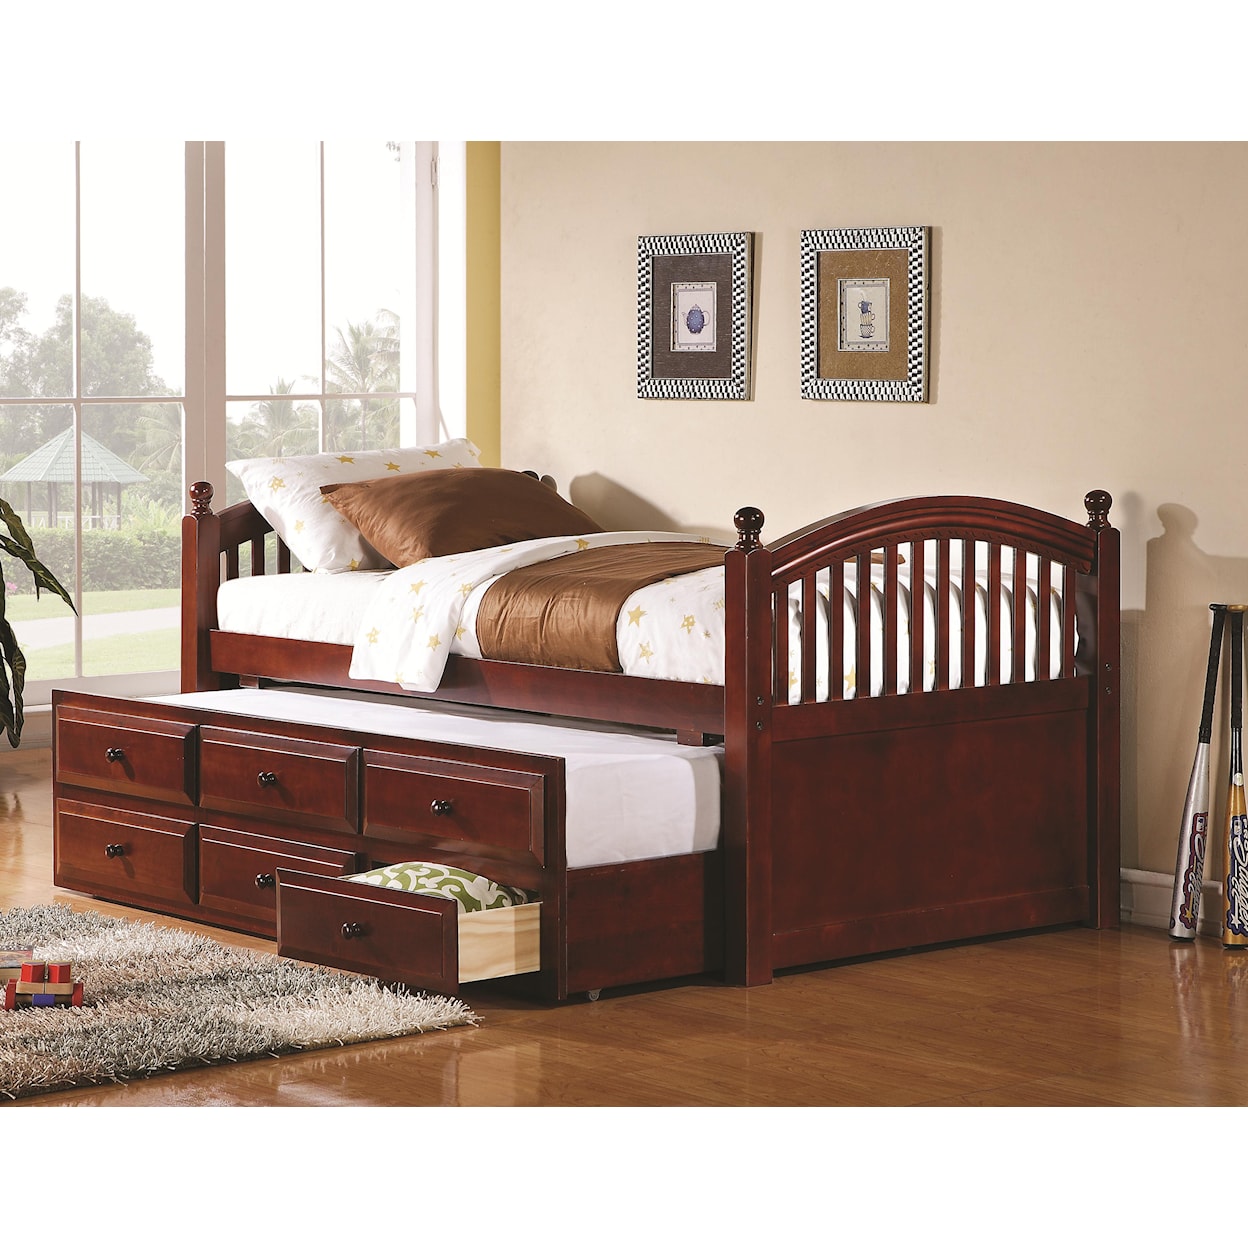 Michael Alan CSR Select Daybeds by Coaster Captain's Bed